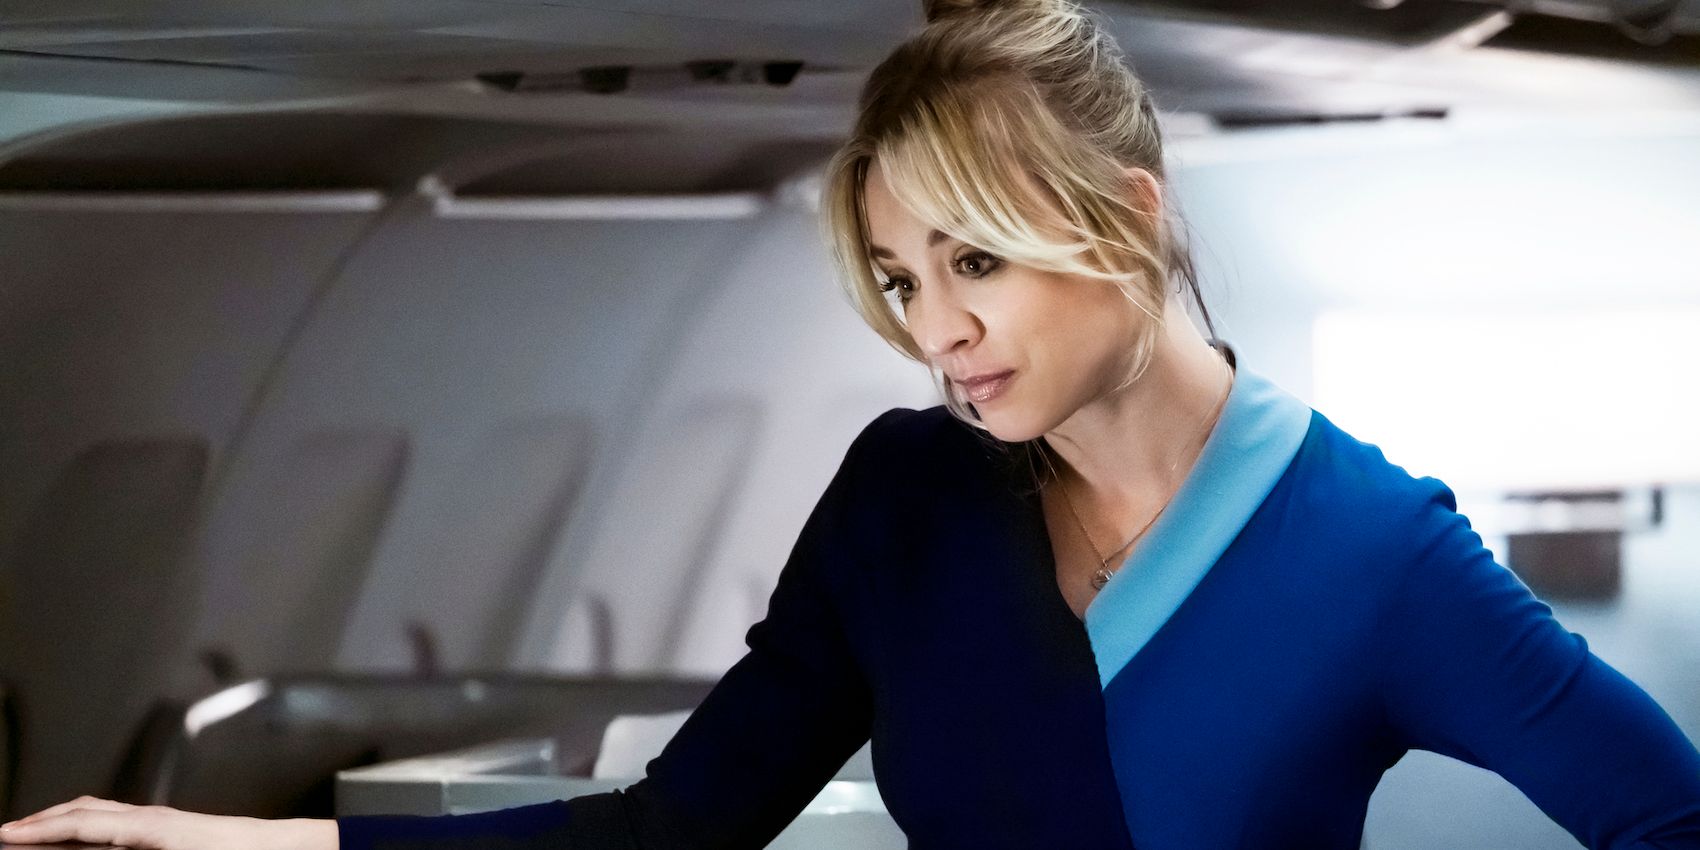 The Flight Attendant: Watch Episode 1 of HBO Max Mystery for Free - How Many Episodes Of Flight Attendant Are There